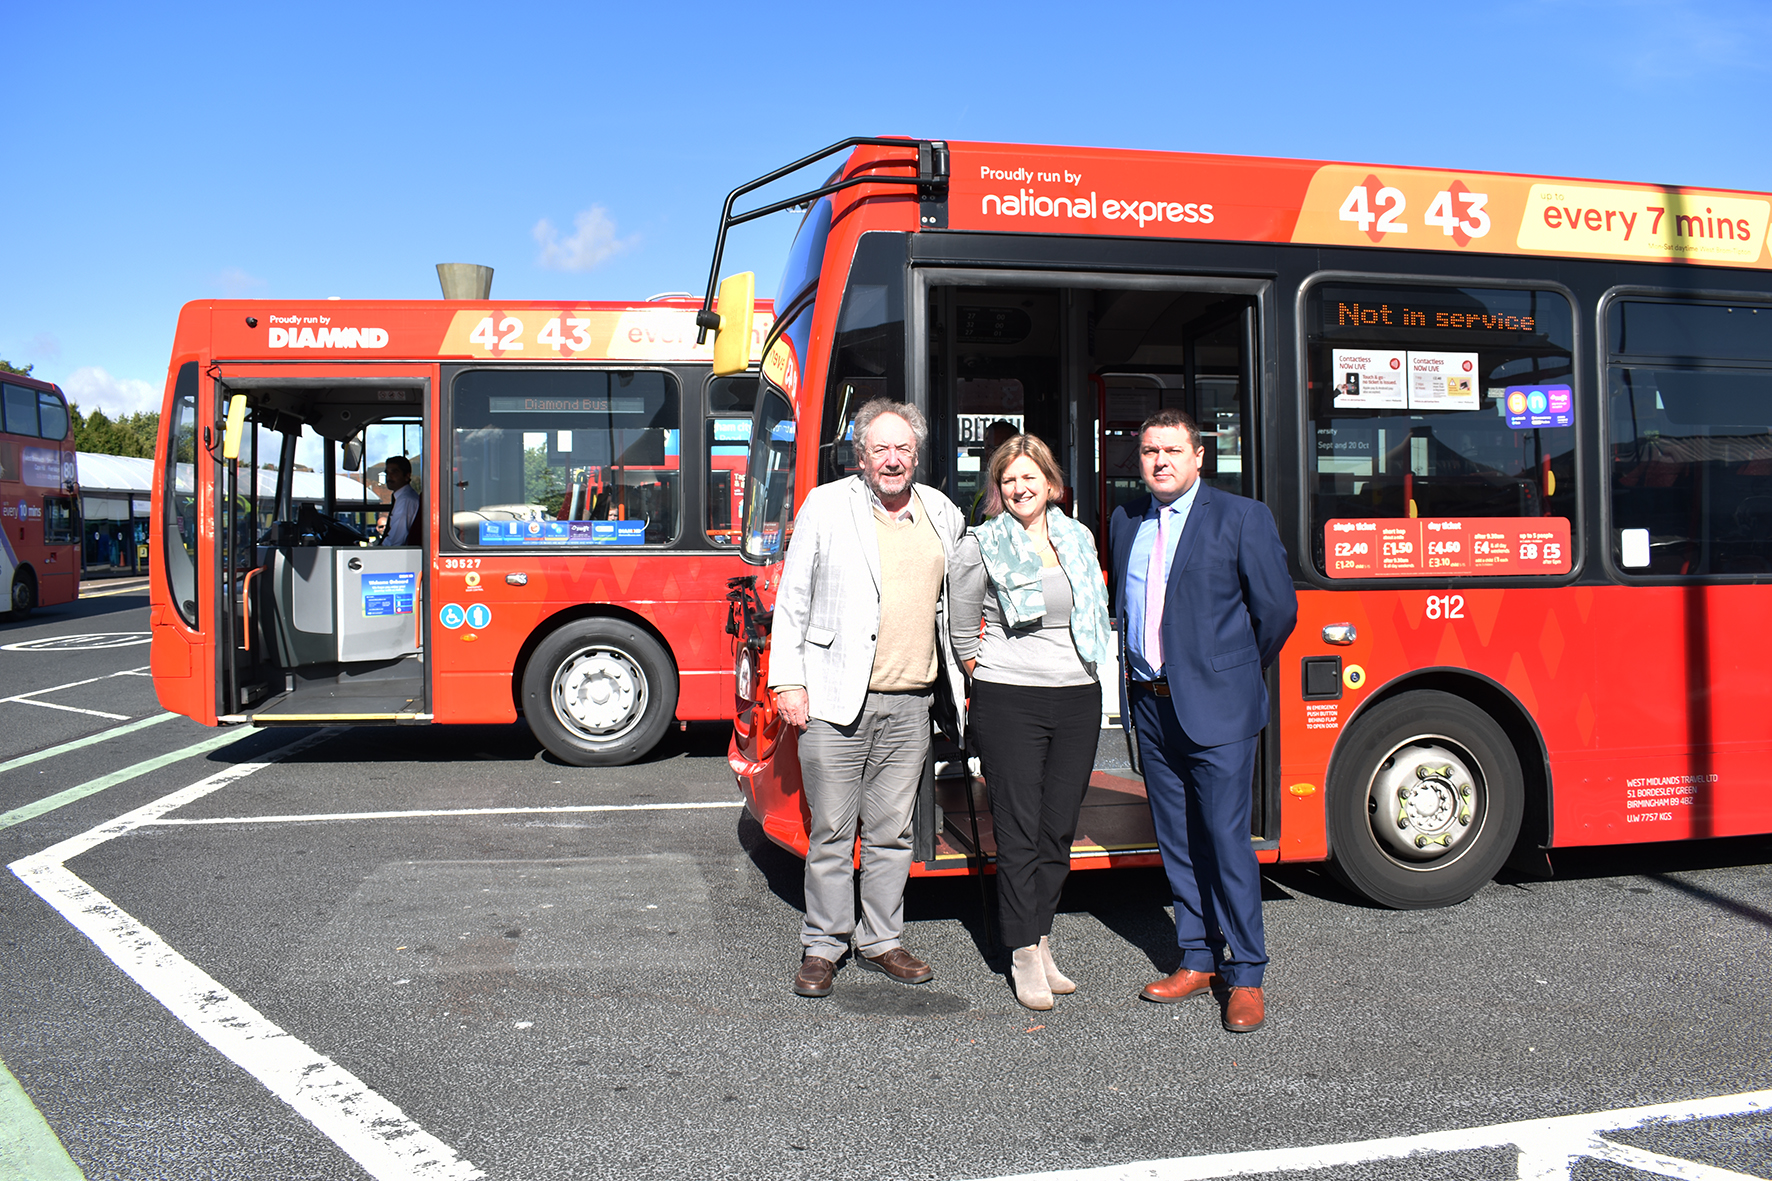 Cllr Roger Lawrence, WMCA portfolio holder for transport, left, Ali Bell, head of external communications (UK Bus) for National Express, and business director Bob Baker from Diamond Bus with the new West Midlands Transport branded buses at West Bromwich bus station